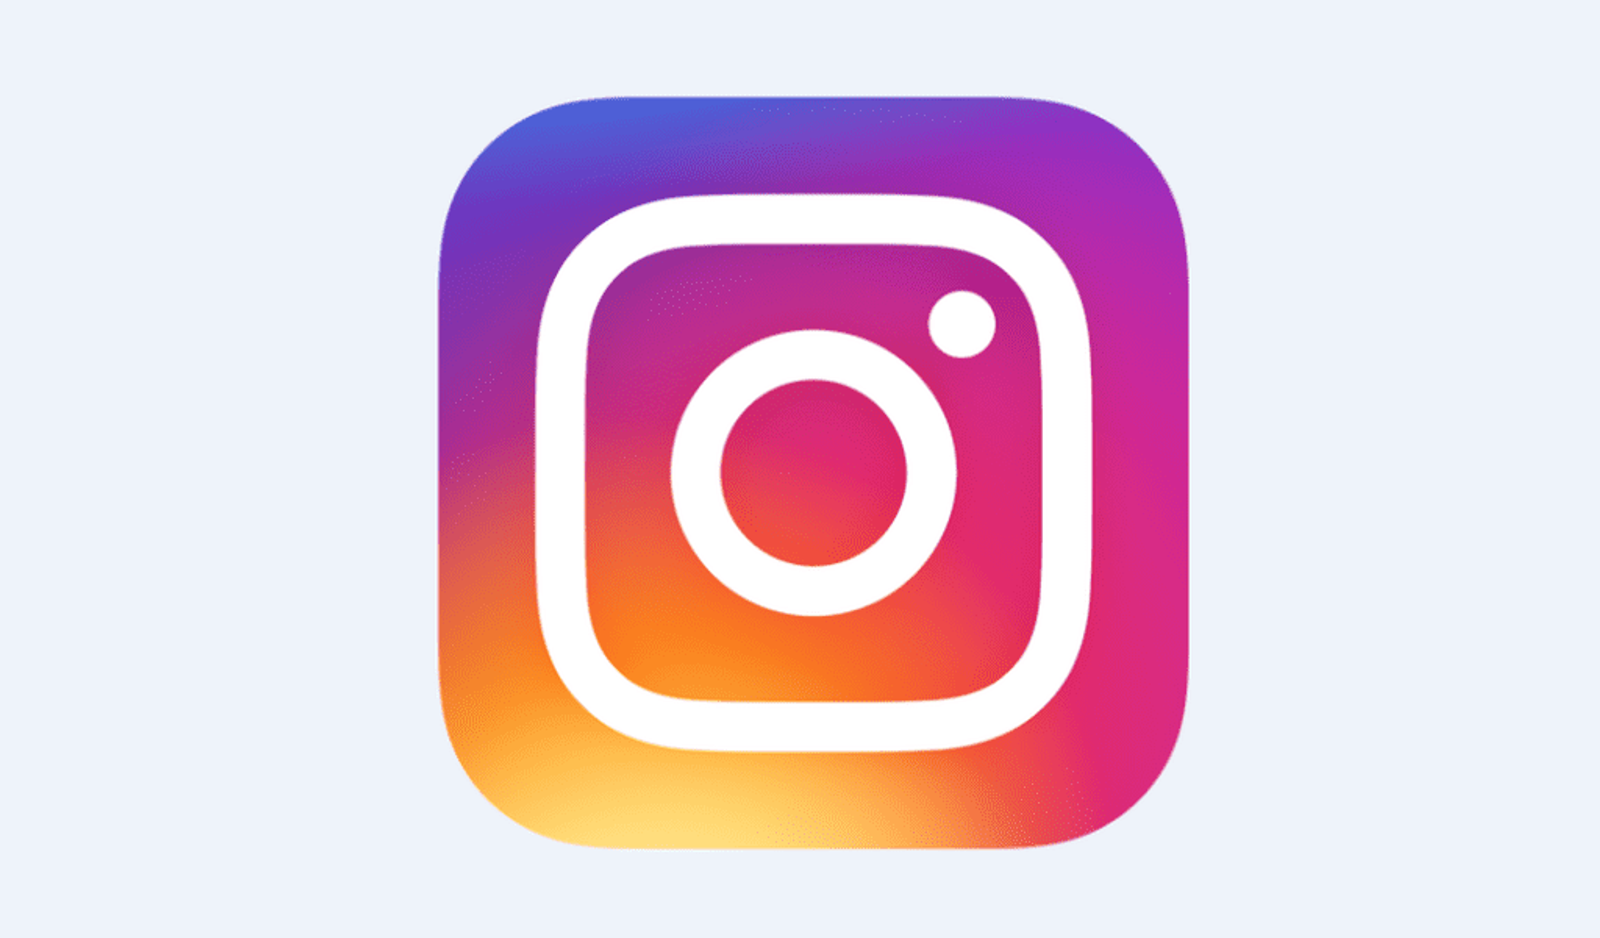 Instagram to Launch Test to Hide Likes, View Numbers on Posts